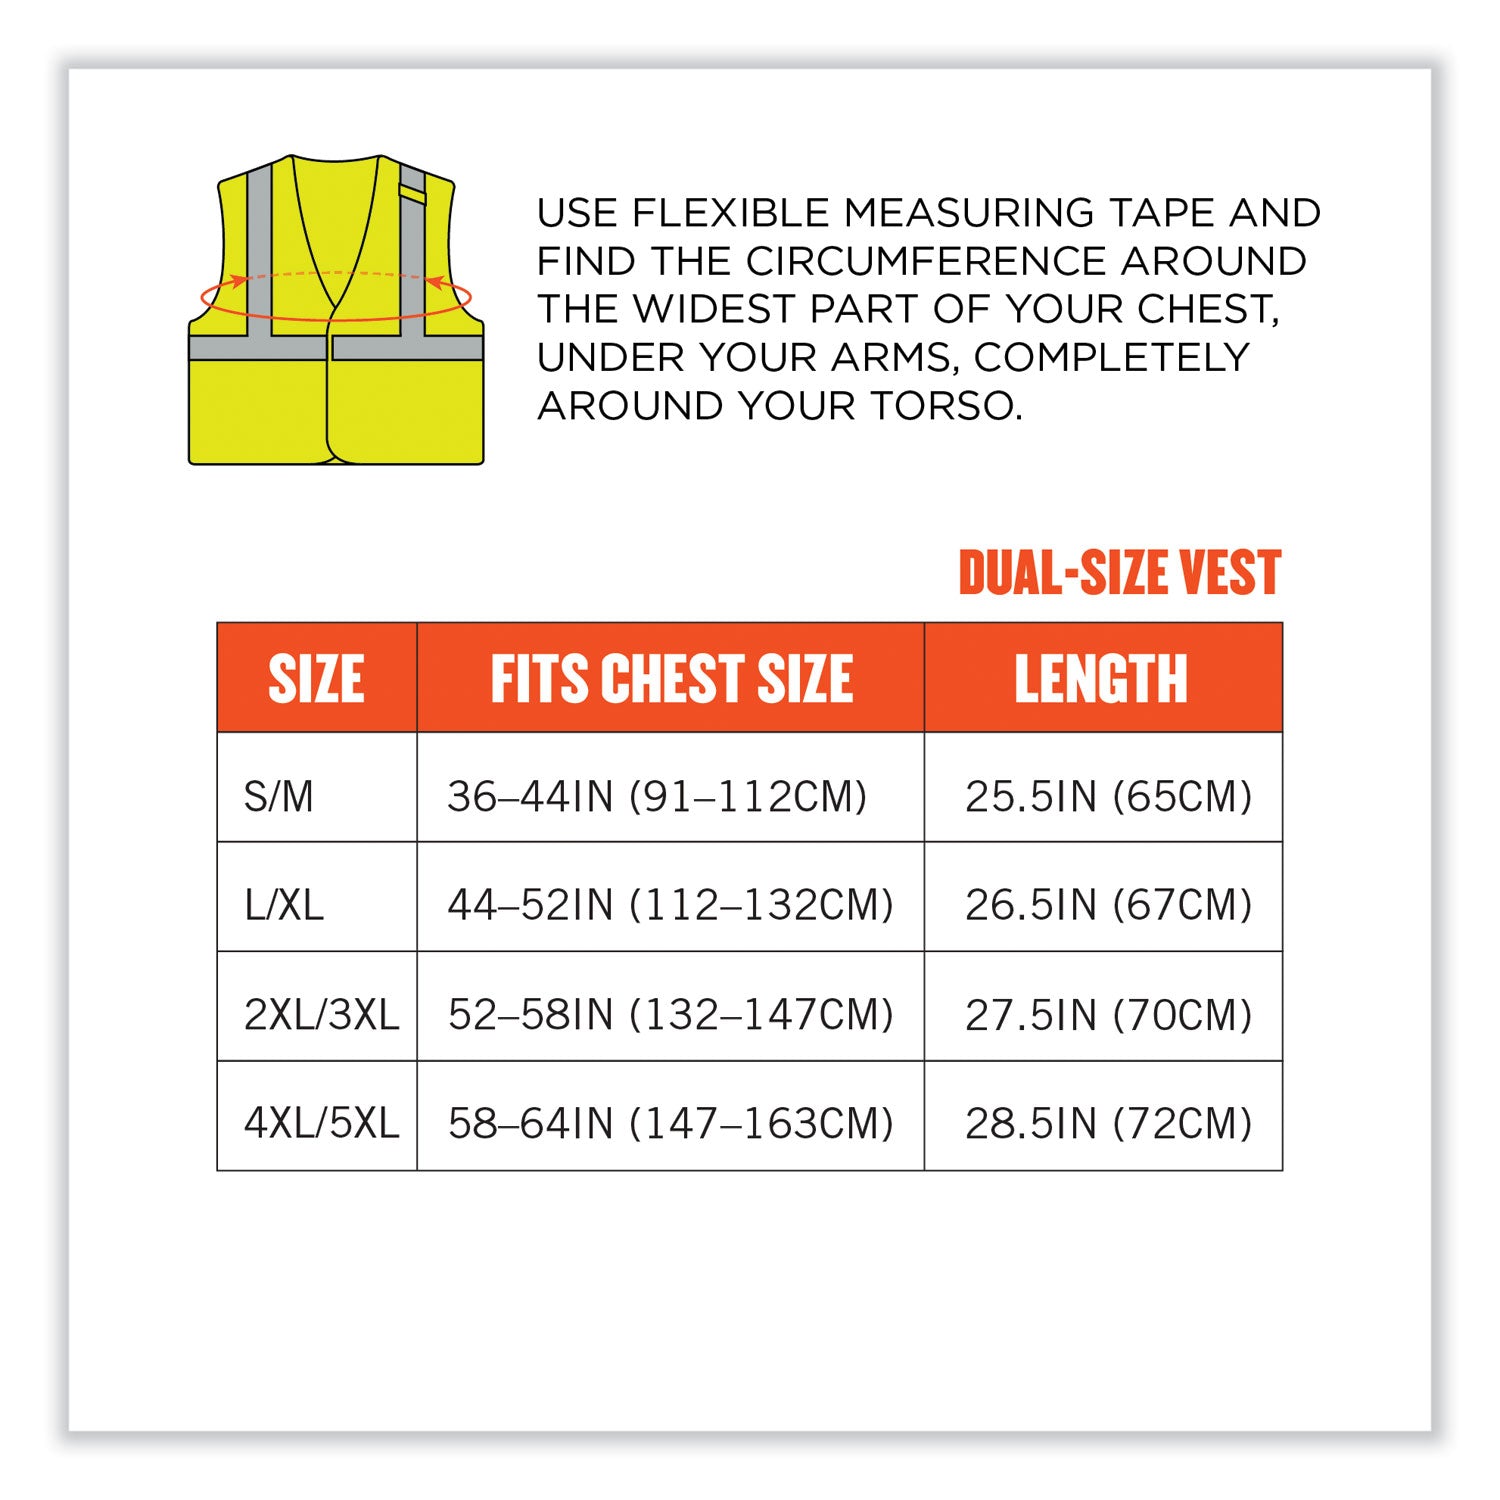 glowear-8263frhl-class-2-fr-safety-economy-hook-and-loop-vest-modacrylic-mesh-cotton-s-m-lime-ships-in-1-3-business-days_ego21863 - 8